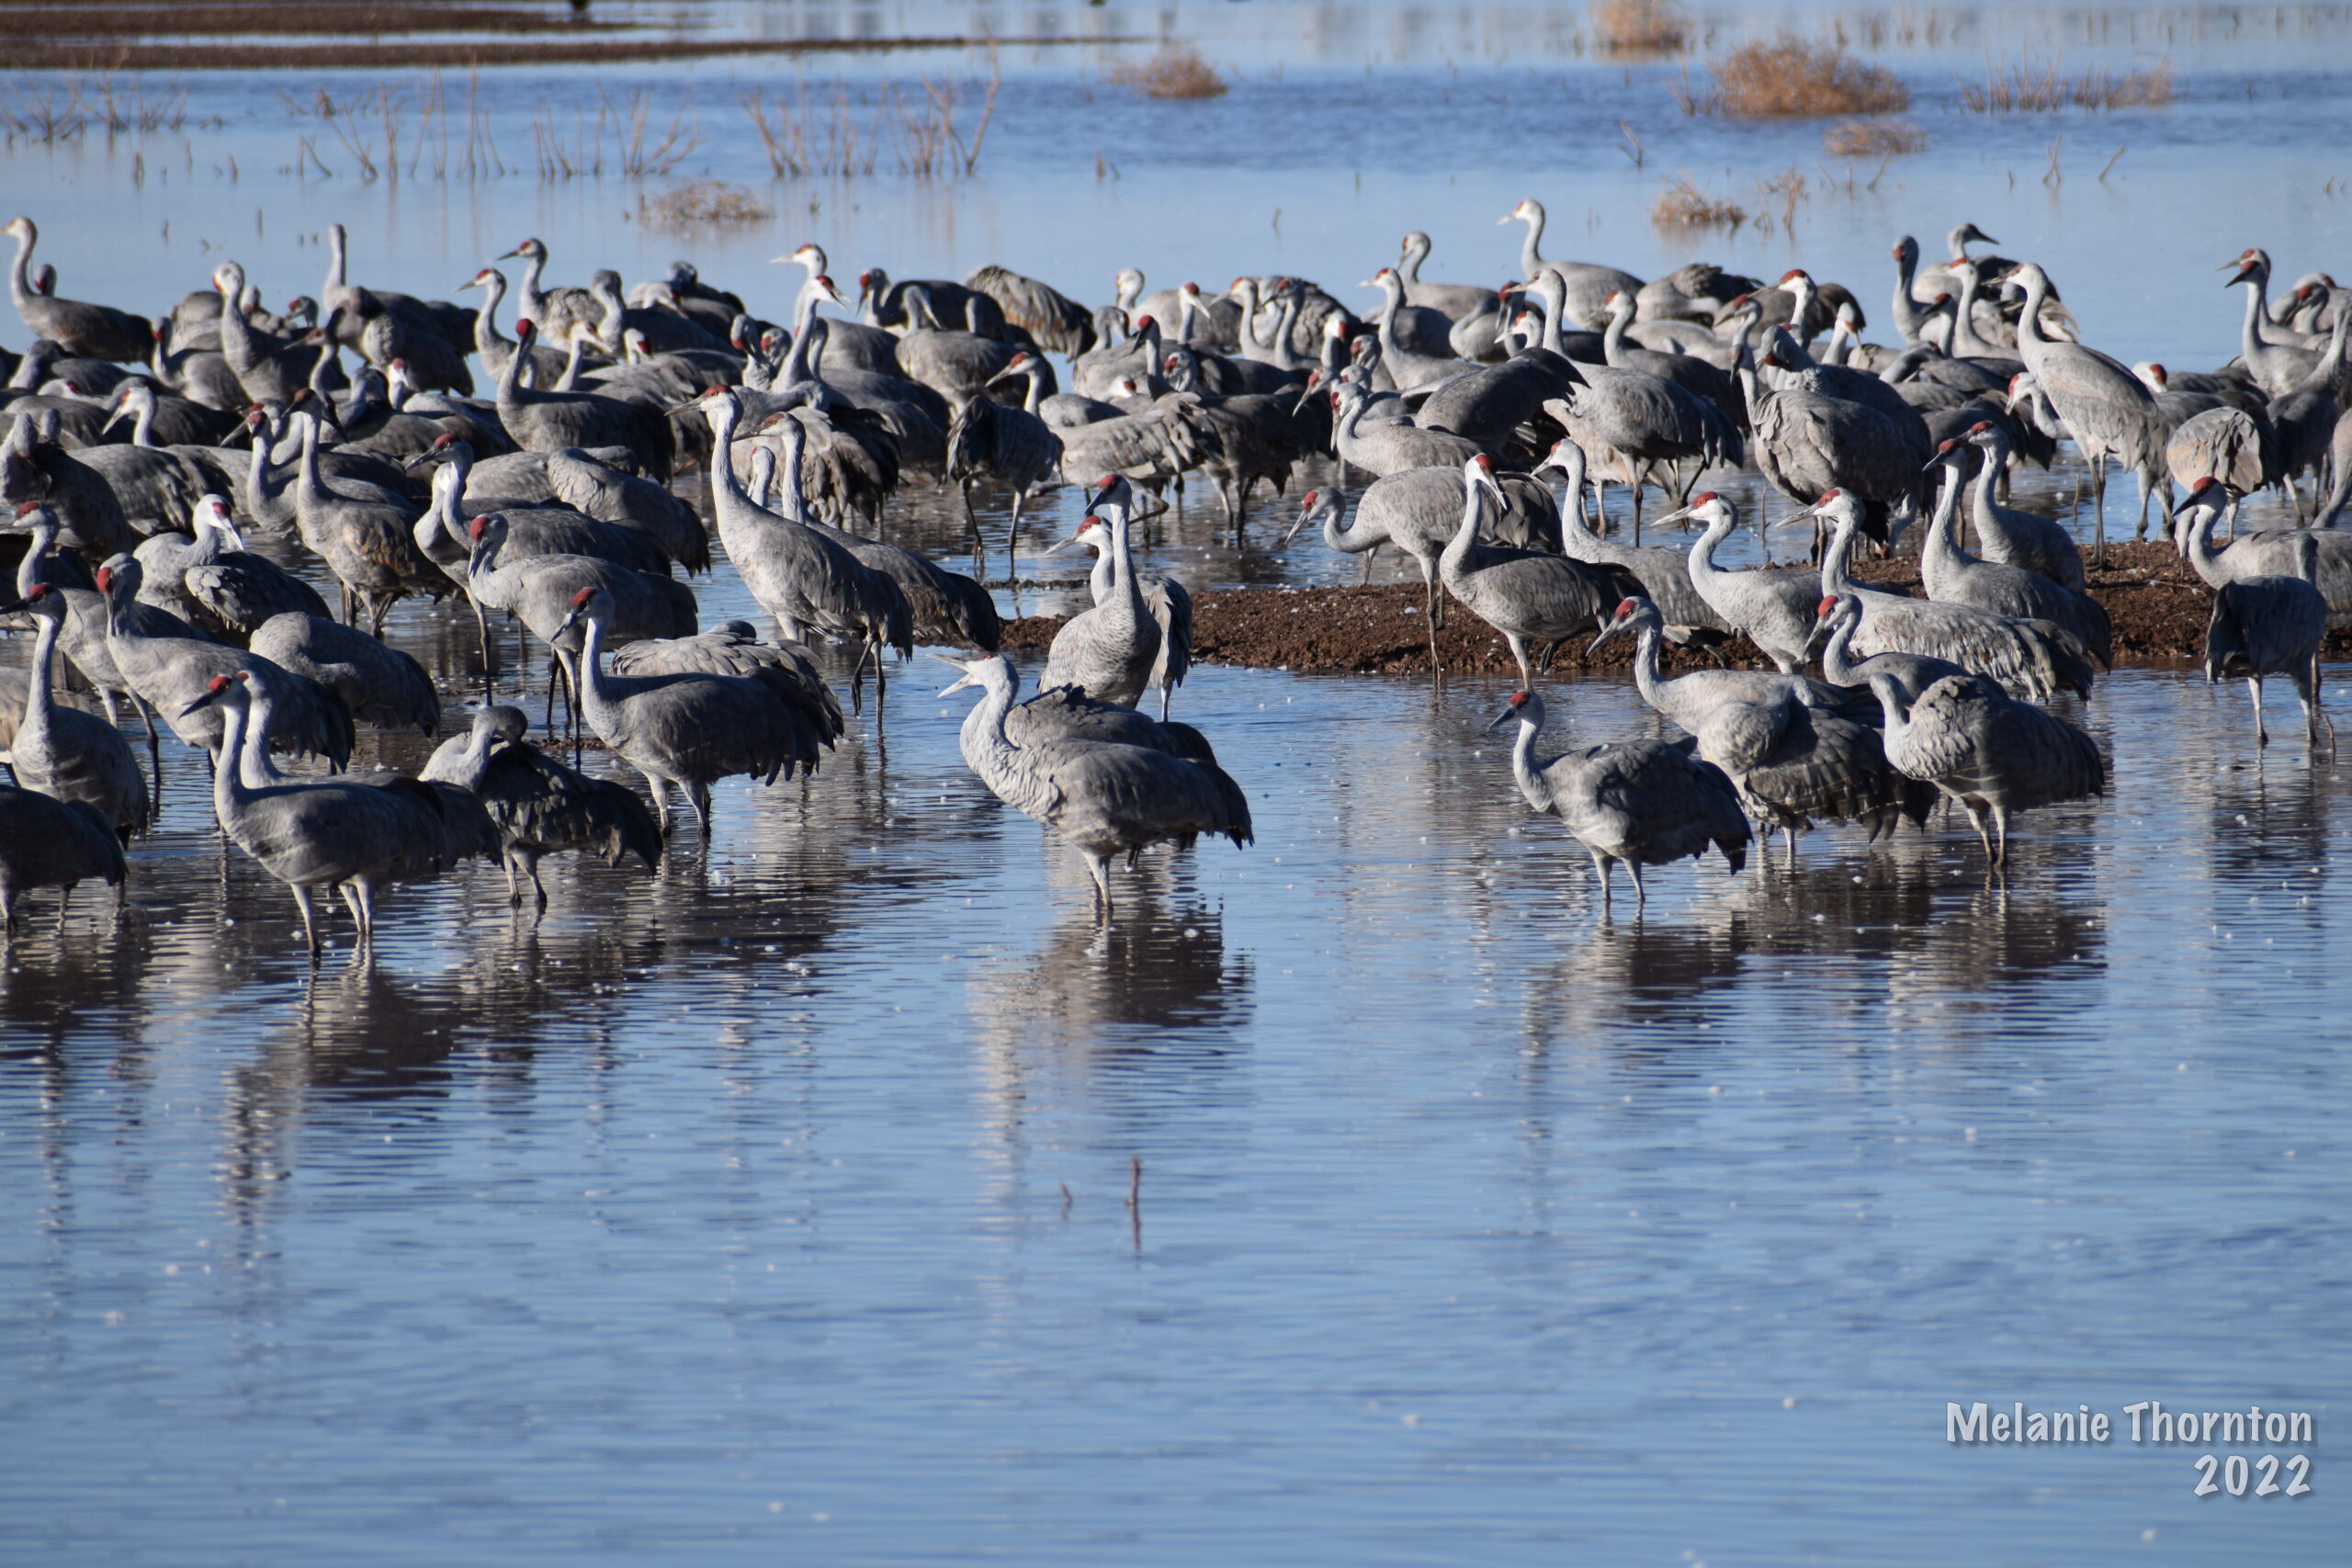 Many large gray birds stand together in shallow water. They have long necks and legs and a red spot on their face.